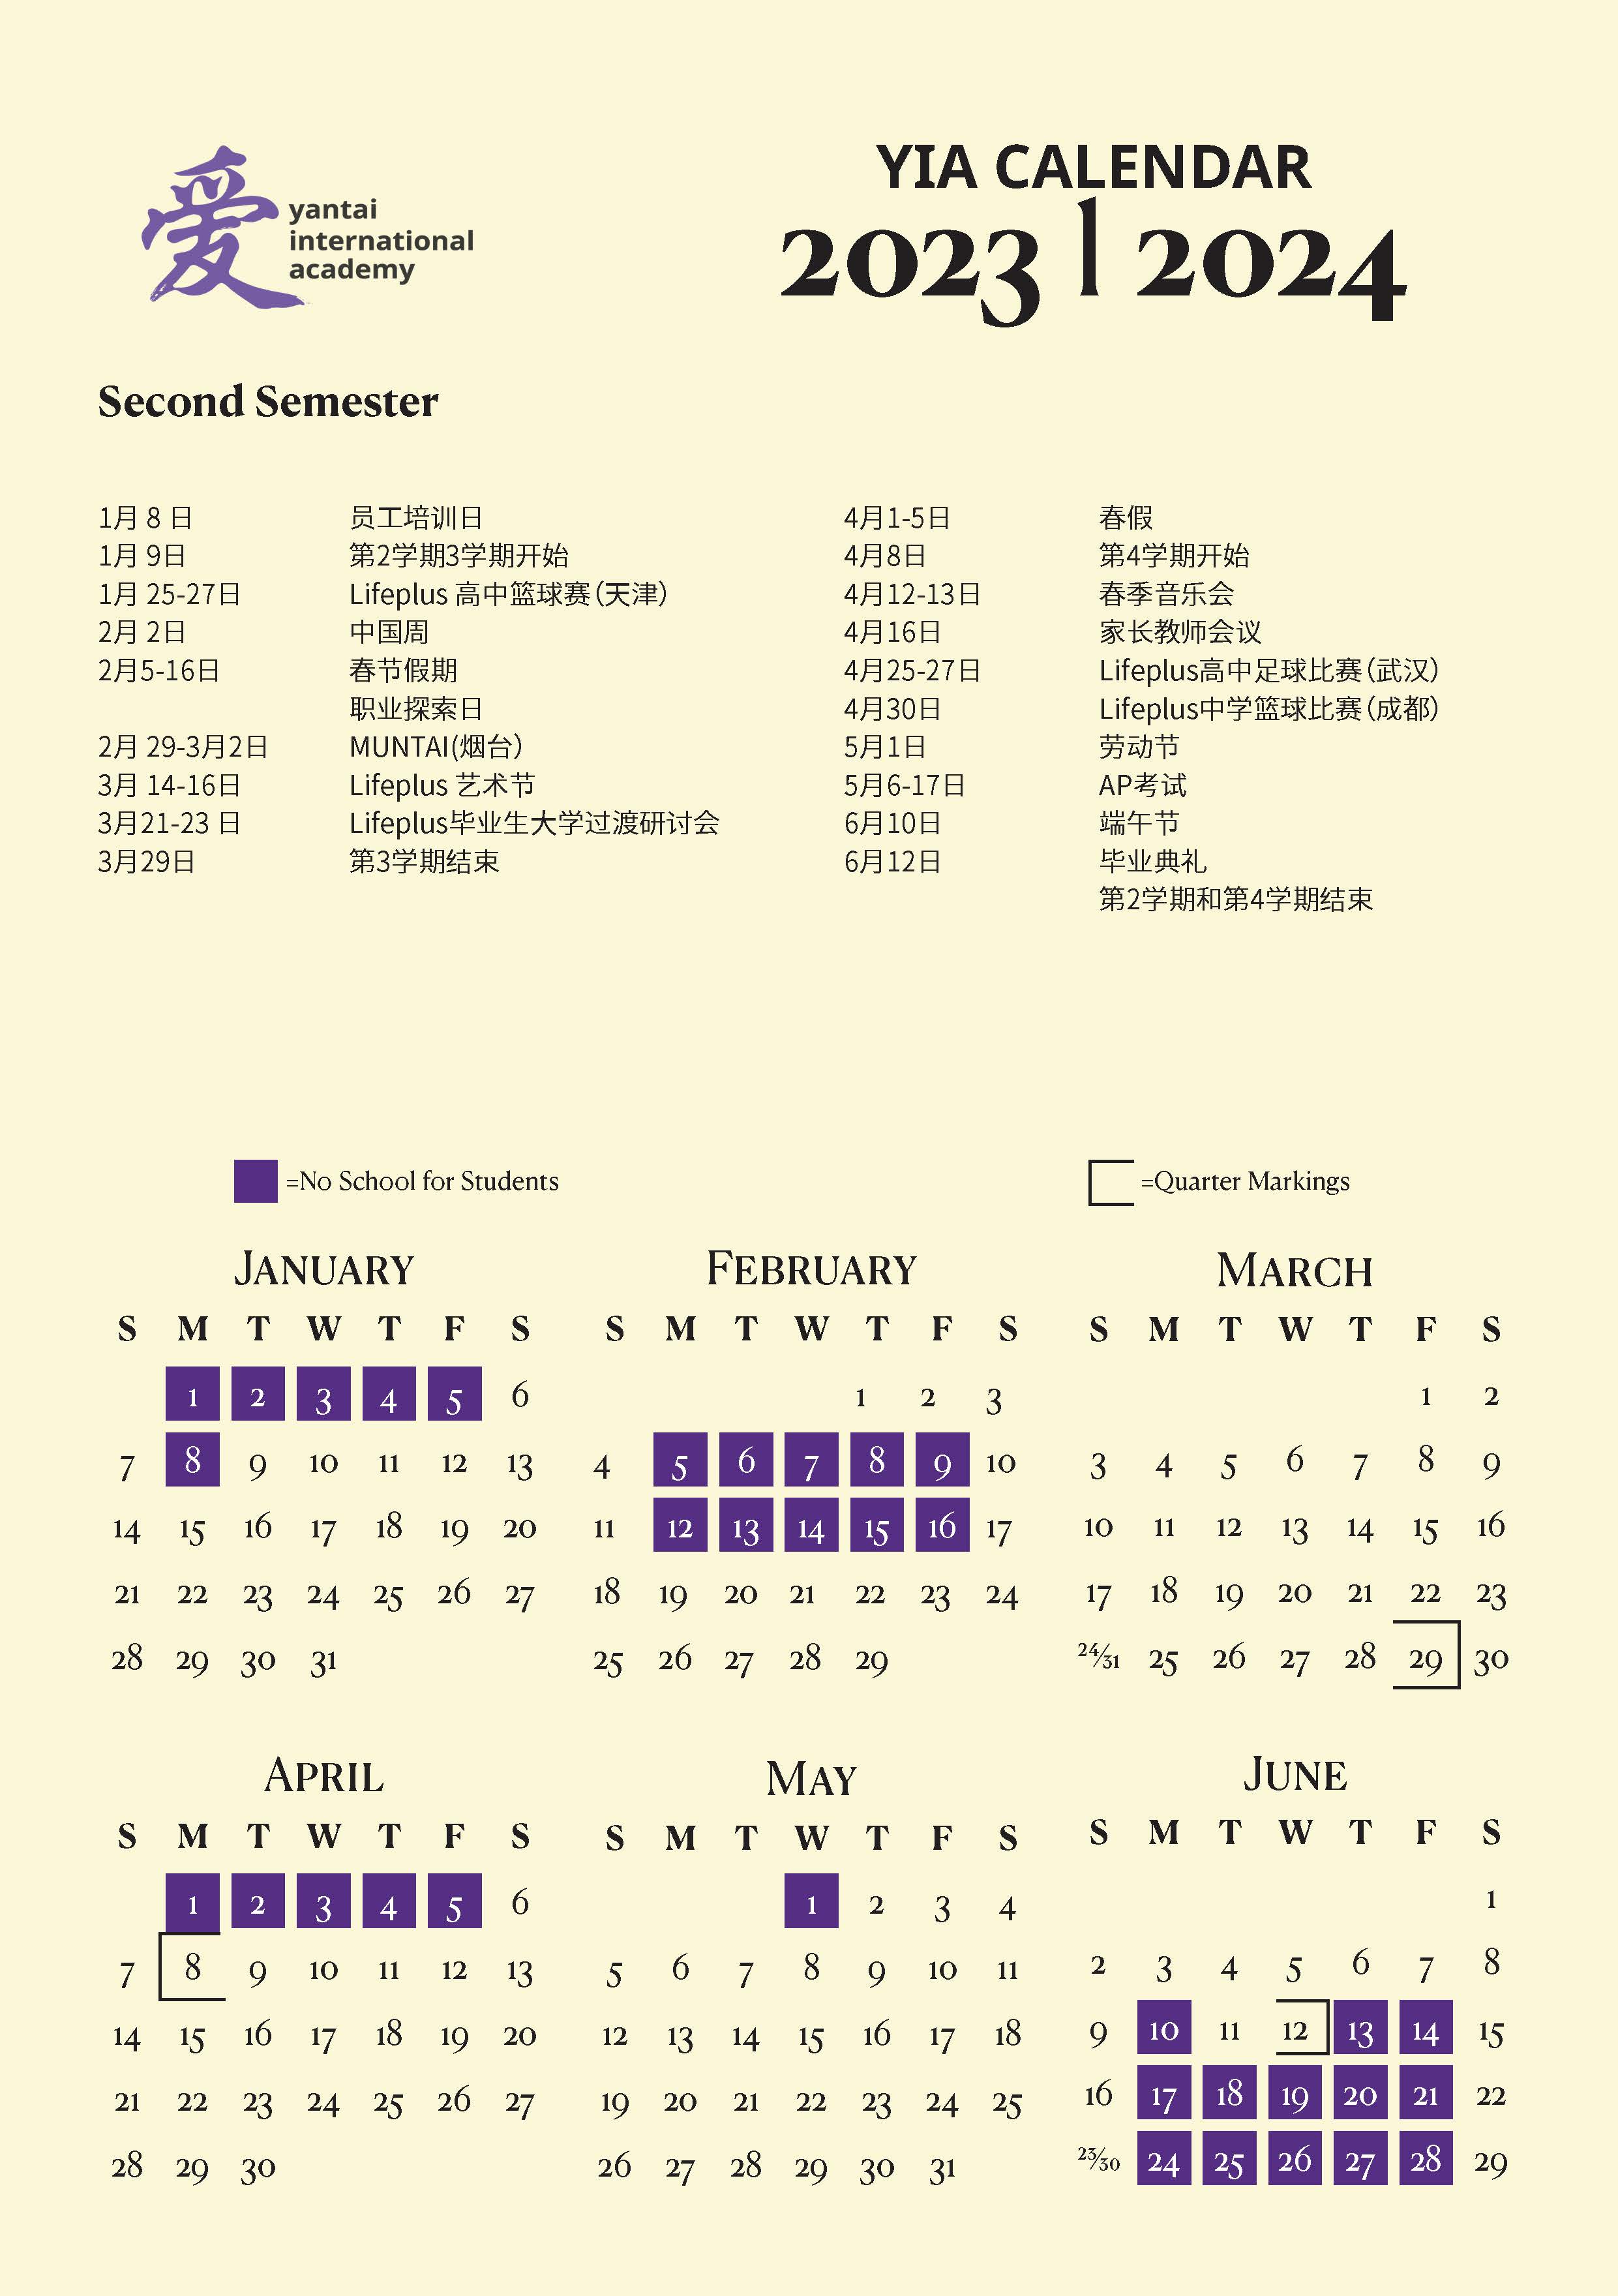 YIA%20Calendar%202023-2024_Chinese_Page_2